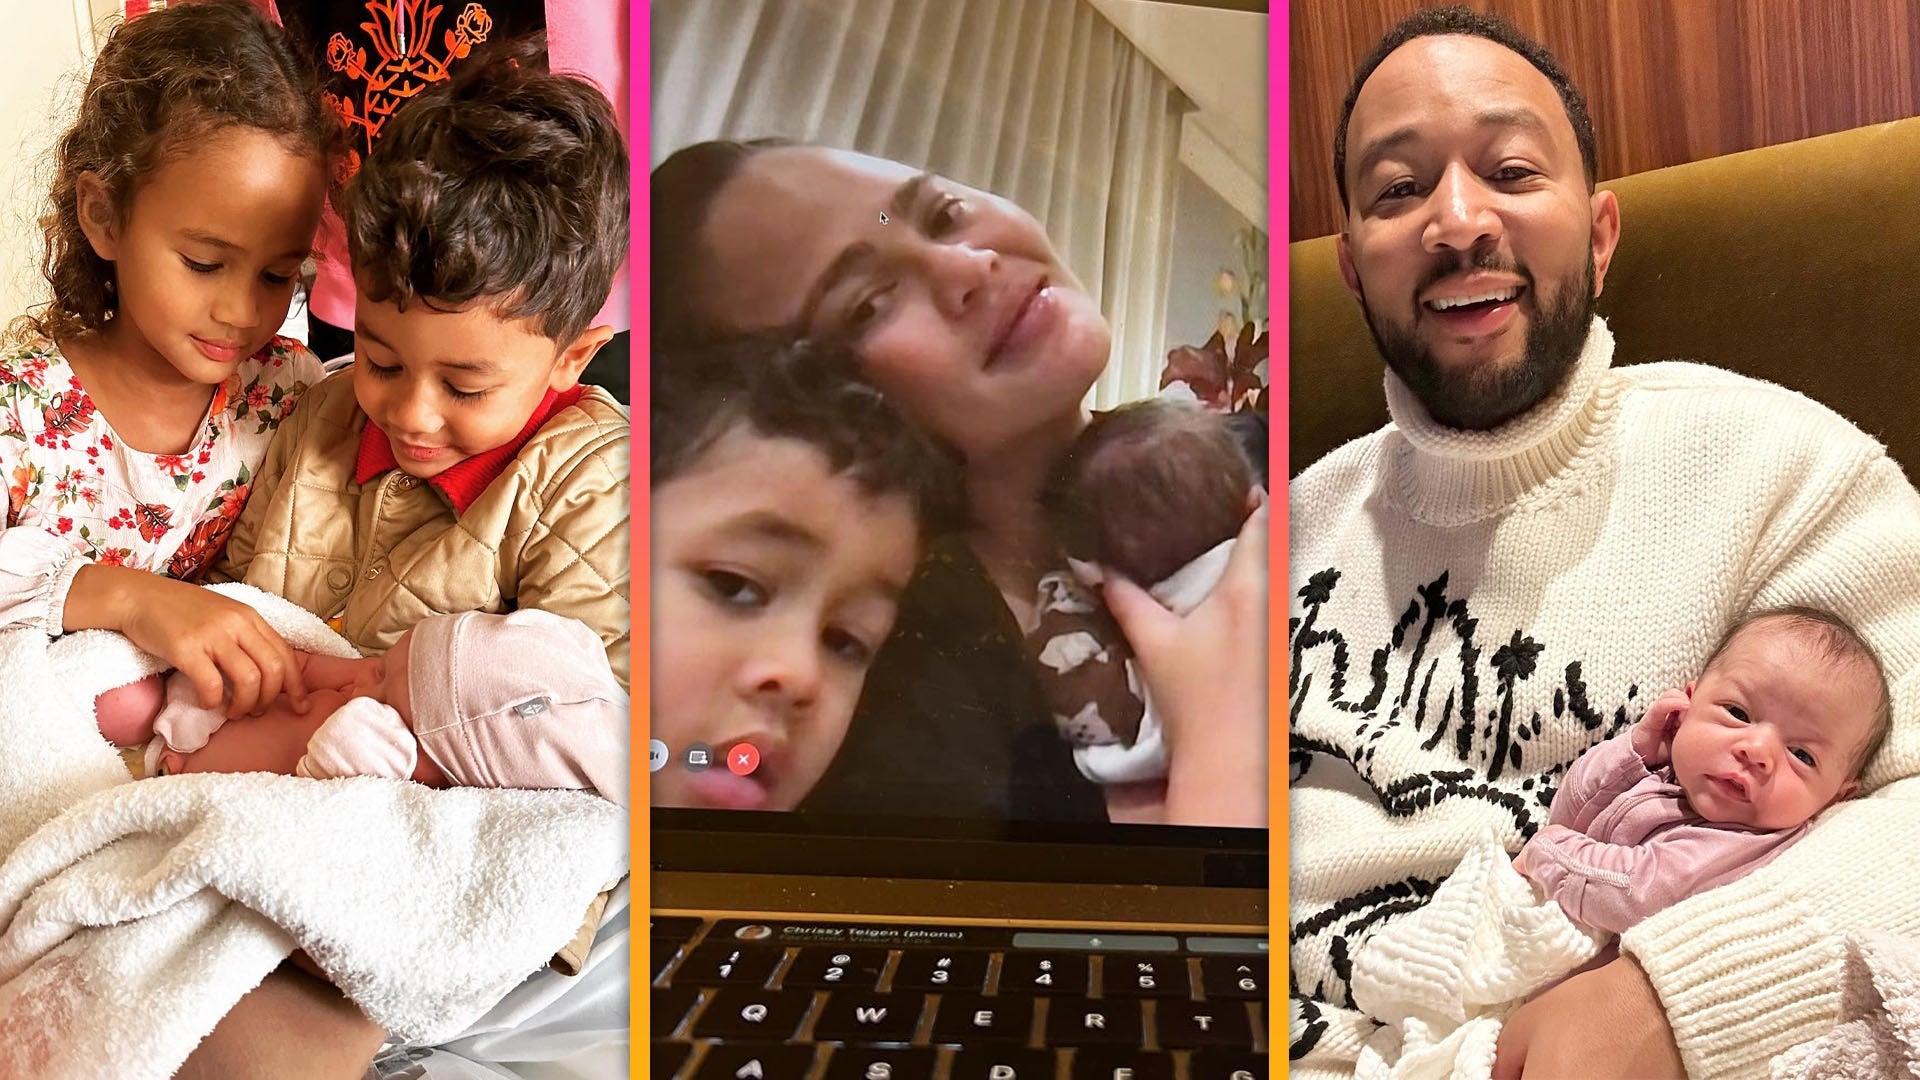 Inside Chrissy Teigen and John Legend’s 'Wonderful' New Life With Baby No. 3 (Source)